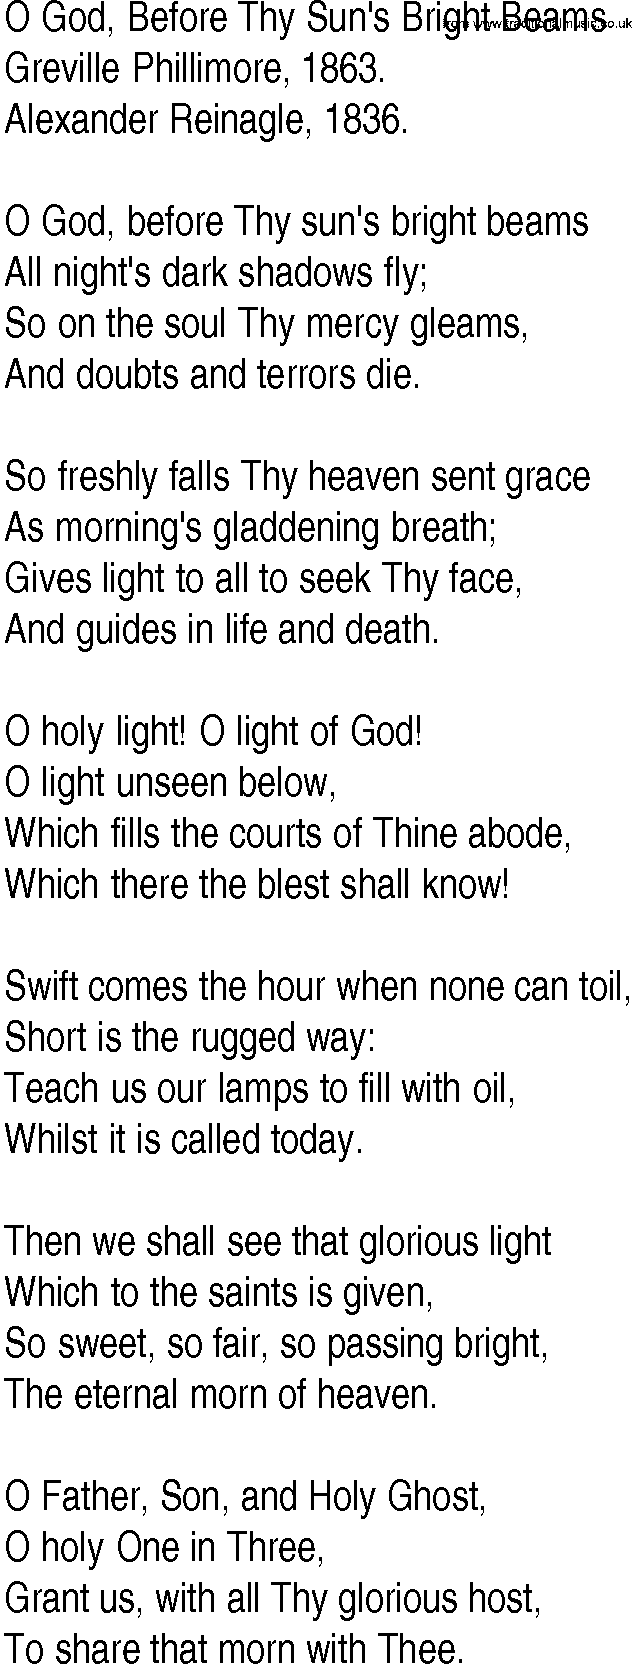 Hymn and Gospel Song: O God, Before Thy Sun's Bright Beams by Greville Phillimore lyrics